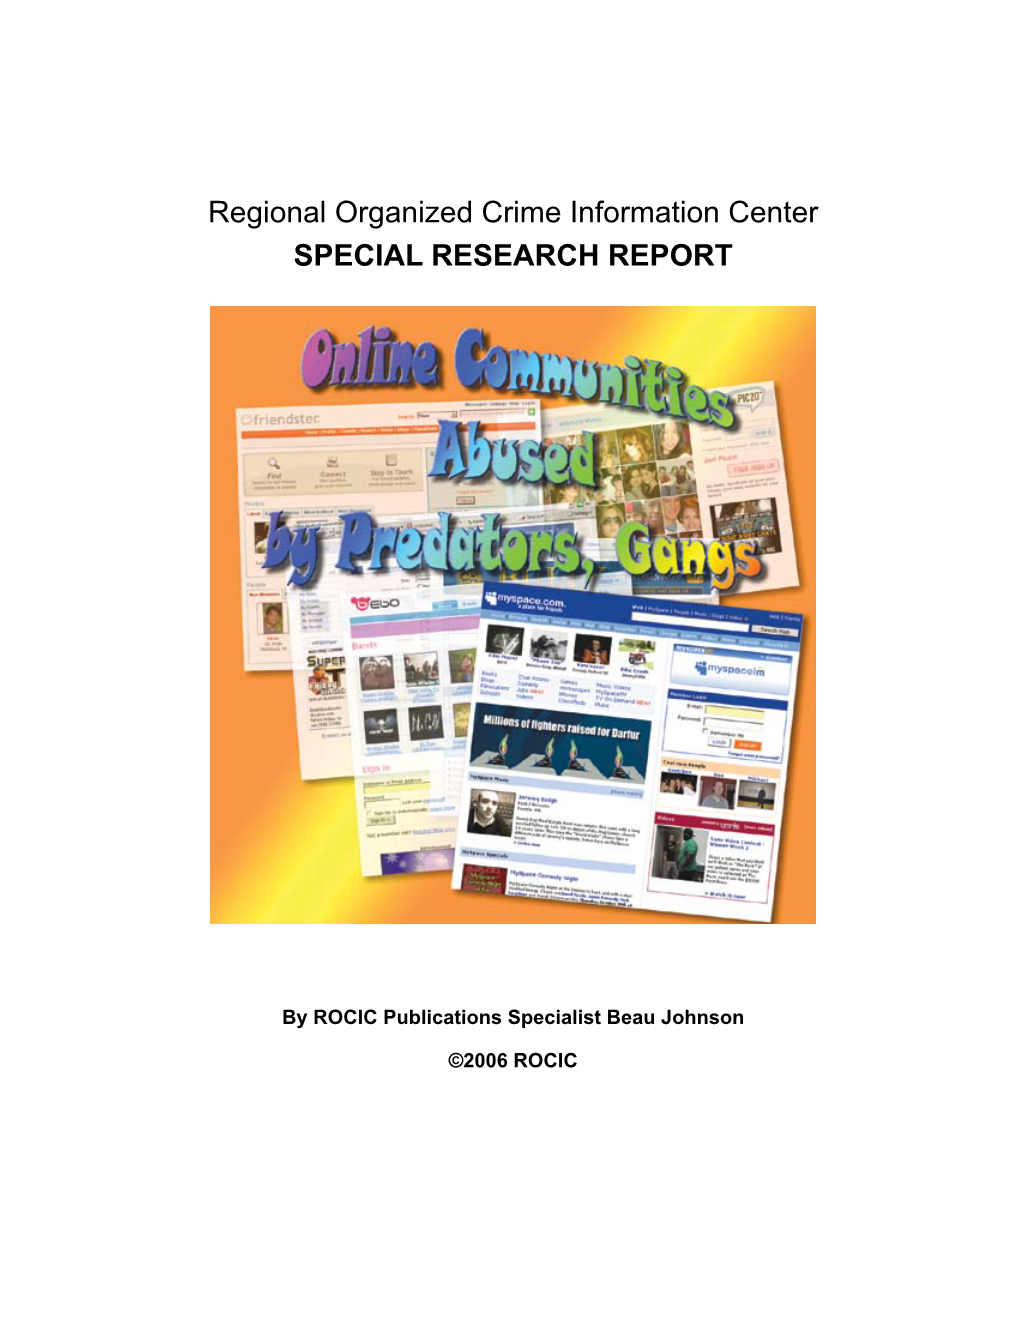 Regional Organized Crime Information Center SPECIAL RESEARCH REPORT